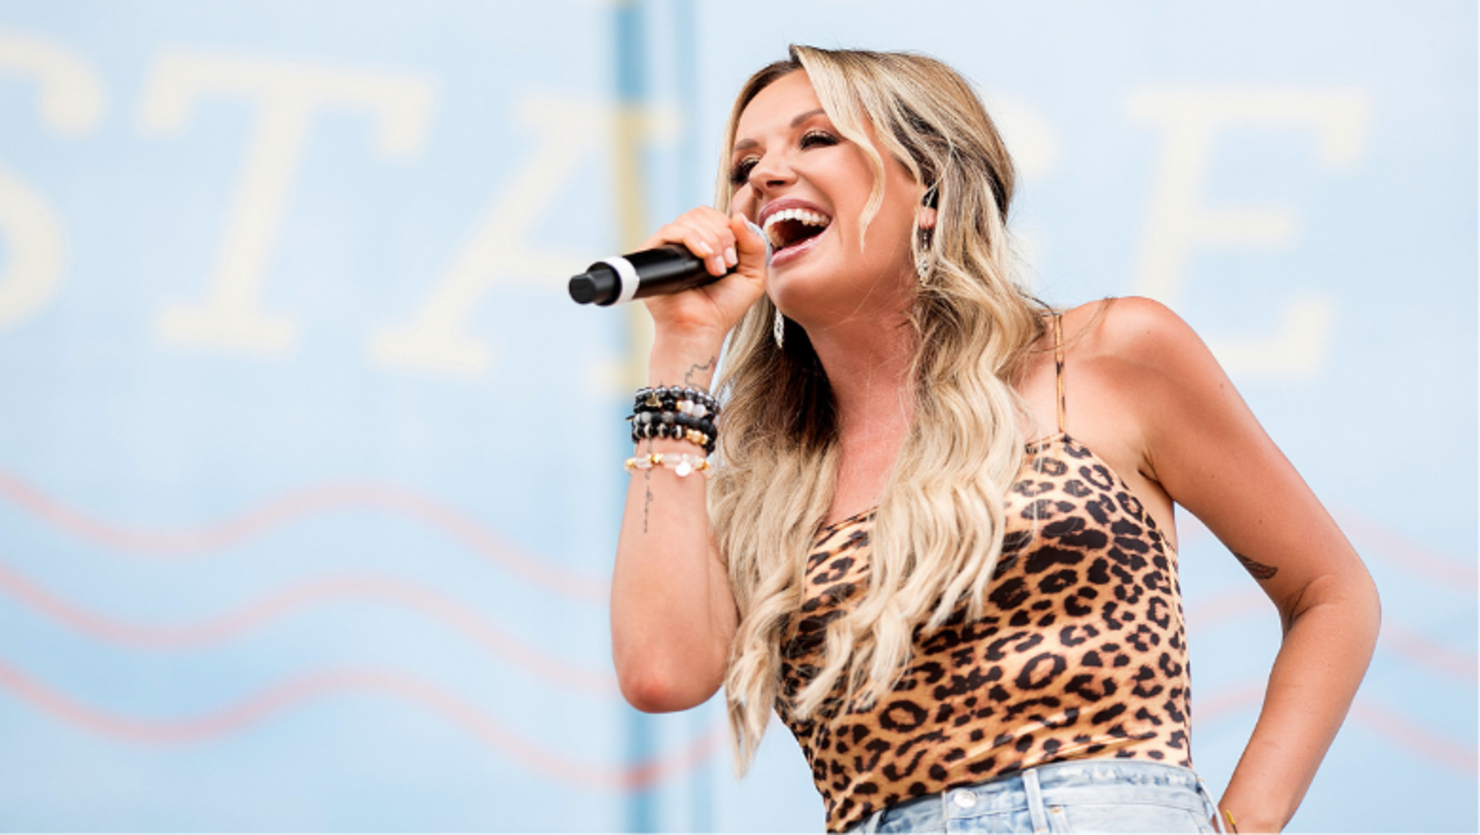 Carly Pearce Opens Up About Her Struggle With Self-Esteem Over The Years